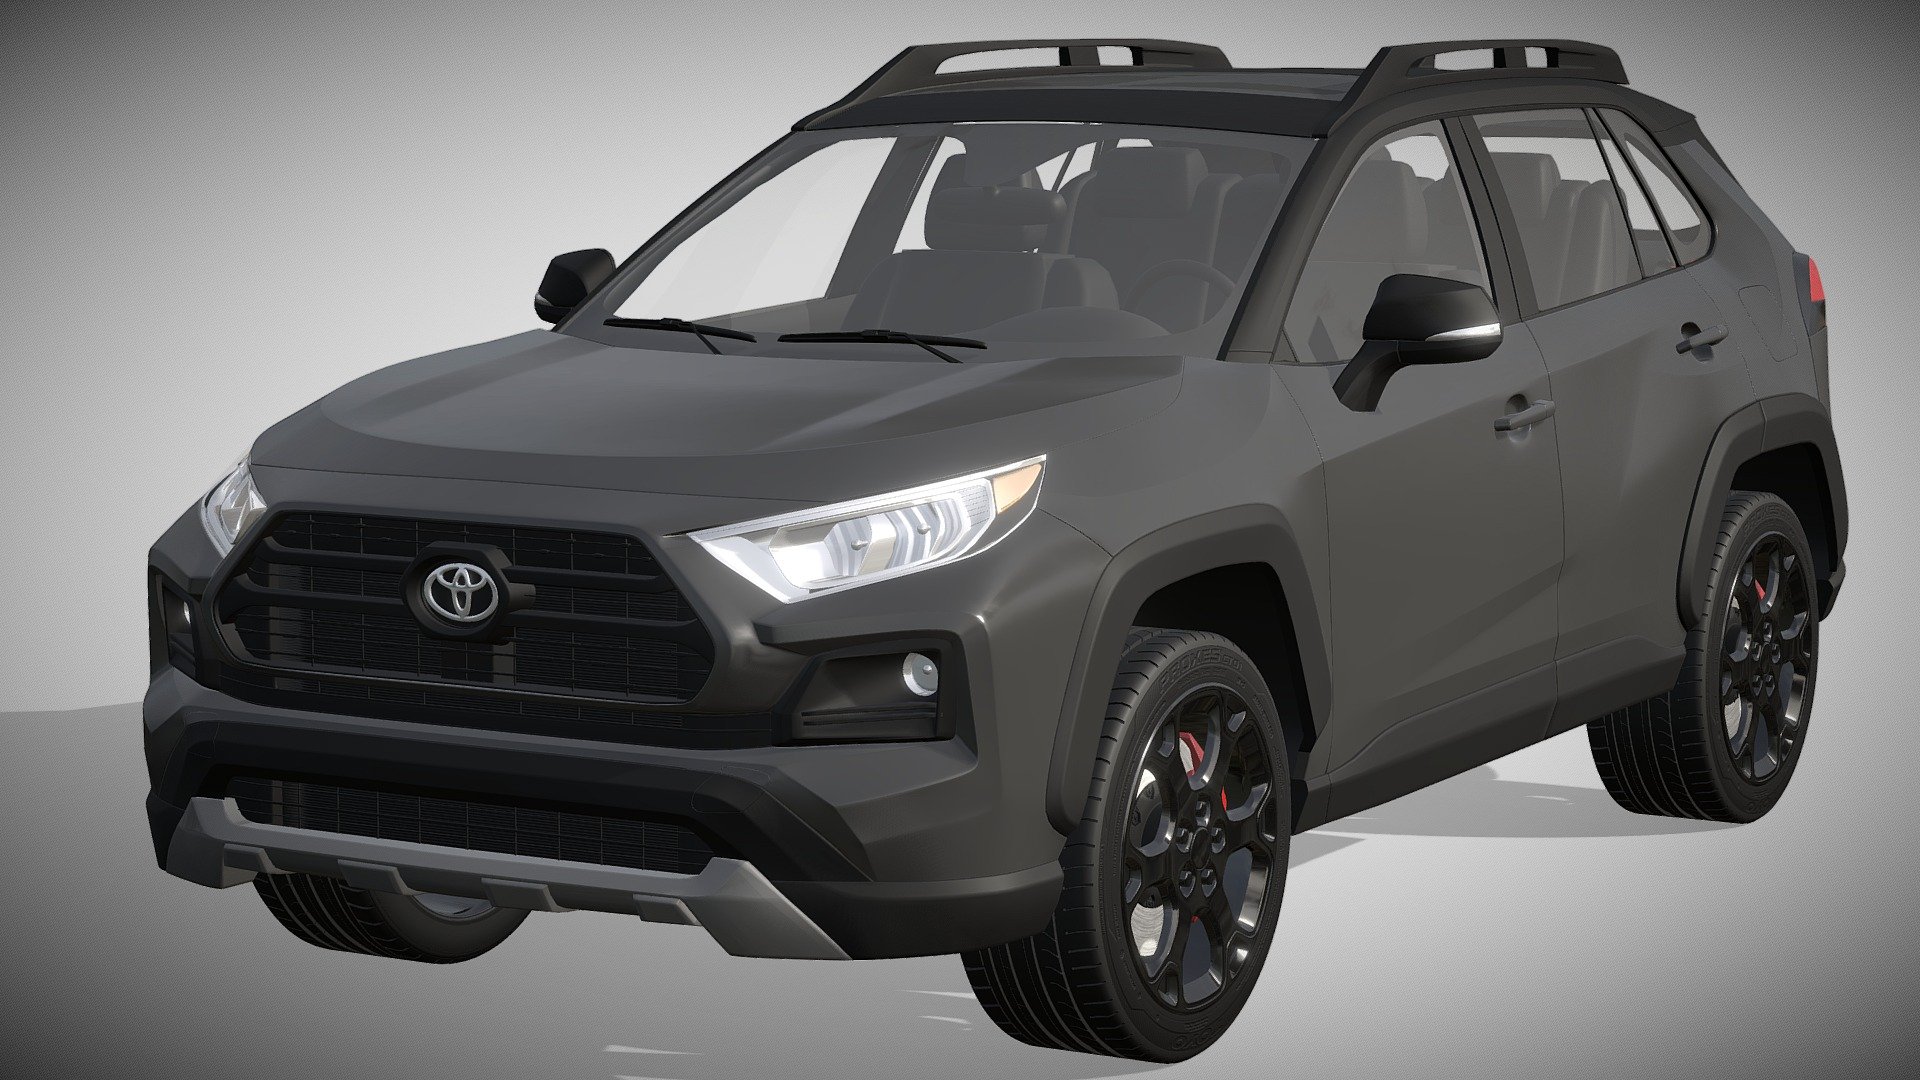 Toyota RAV4 TRD Off-Road 2020

https://www.toyota.com/configurator/build/step/model/year/2020/series/rav4/model/4448

Clean geometry Light weight model, yet completely detailed for HI-Res renders. Use for movies, Advertisements or games

Corona render and materials

All textures include in *.rar files

Lighting setup is not included in the file! - Toyota RAV4 TRD Off-Road 2020 - Buy Royalty Free 3D model by zifir3d 3d model